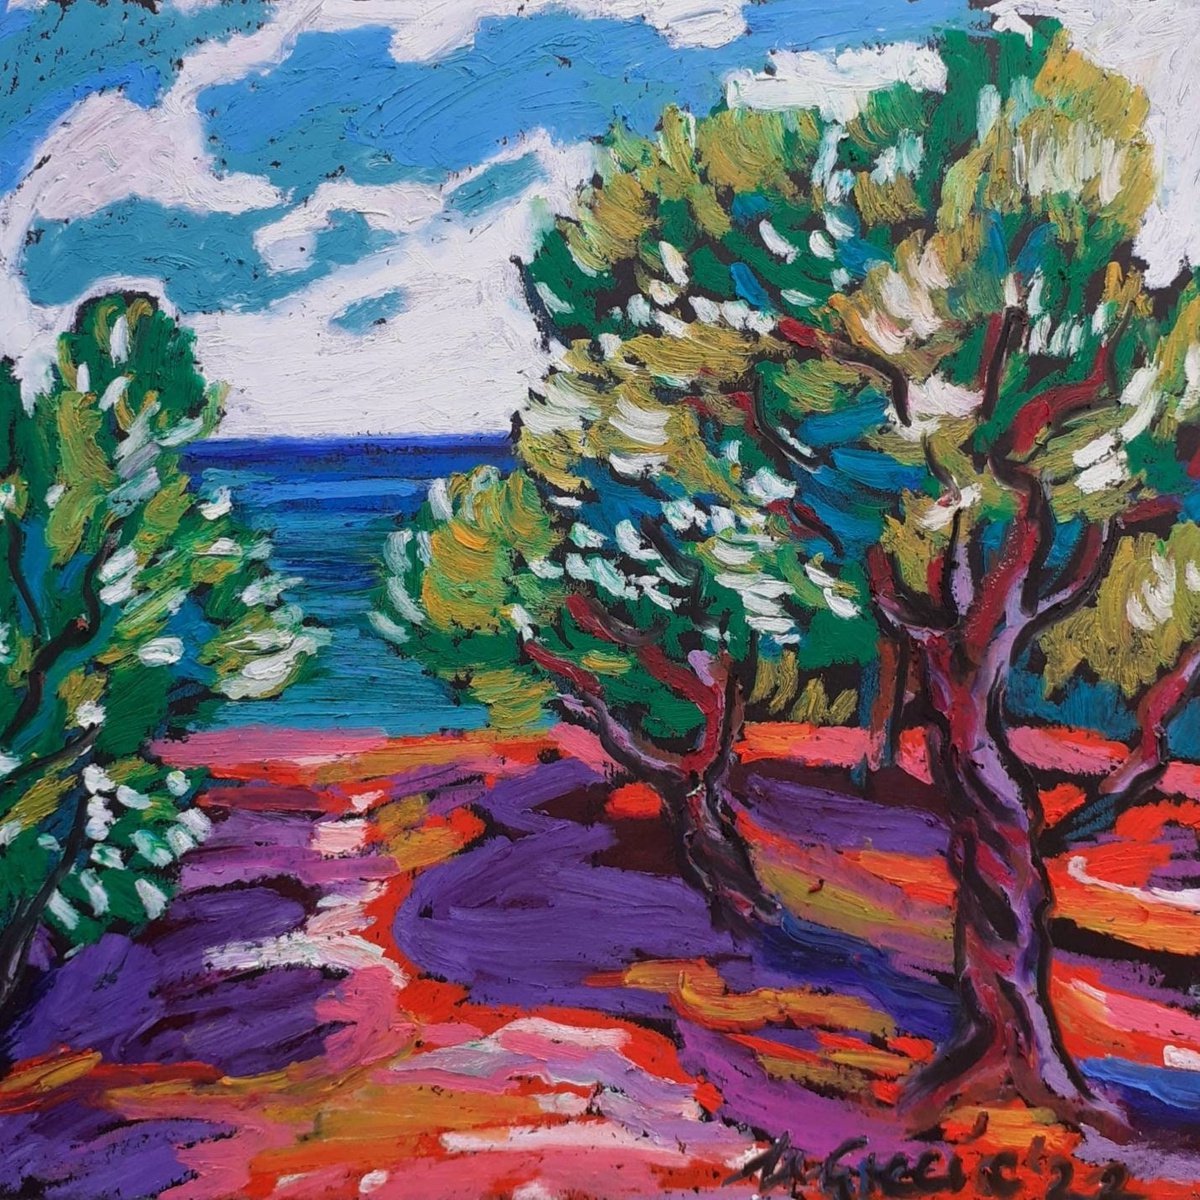 Orchard with a sea view by Maja Grecic